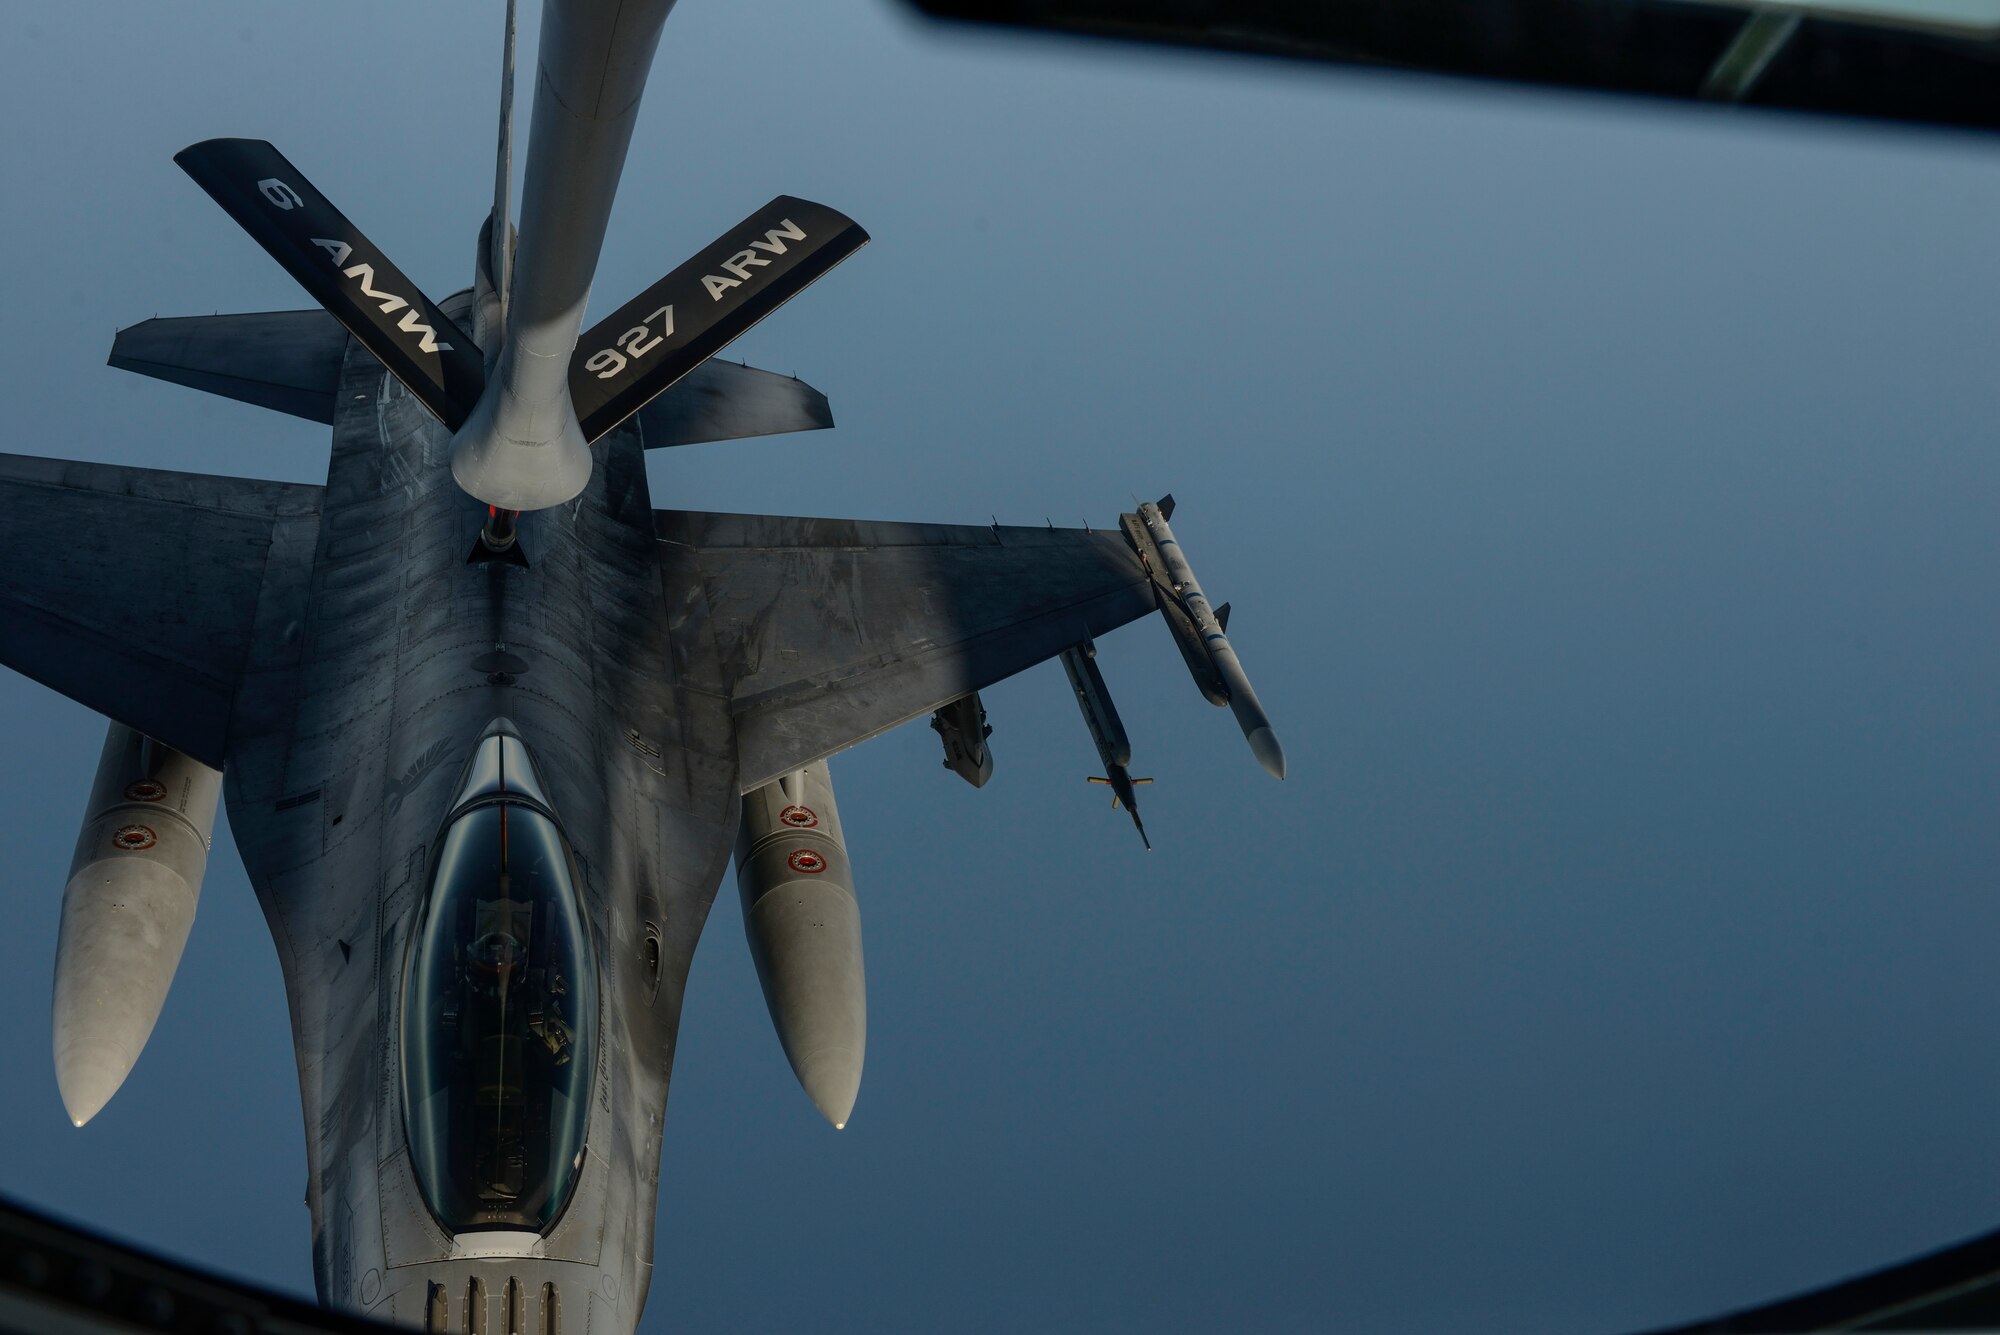 A KC-135 Stratotanker assigned to the 63rd Air Refueling Squadron, 927th Operations Group at MacDill Air Force Base, Fla., refuels an F-16 Fighting Falcon fighter aircraft assigned to the 480th Expeditionary Fighter Squadron, Spangdahlem Air Base, Germany, during a flying training deployment at Souda Bay, Greece, Feb. 2, 2016. The KC-135 extends the operational range and mission capabilities of the F-16 during the FTD. (U.S. Air Force photo by Staff Sgt. Christopher Ruano/Released)